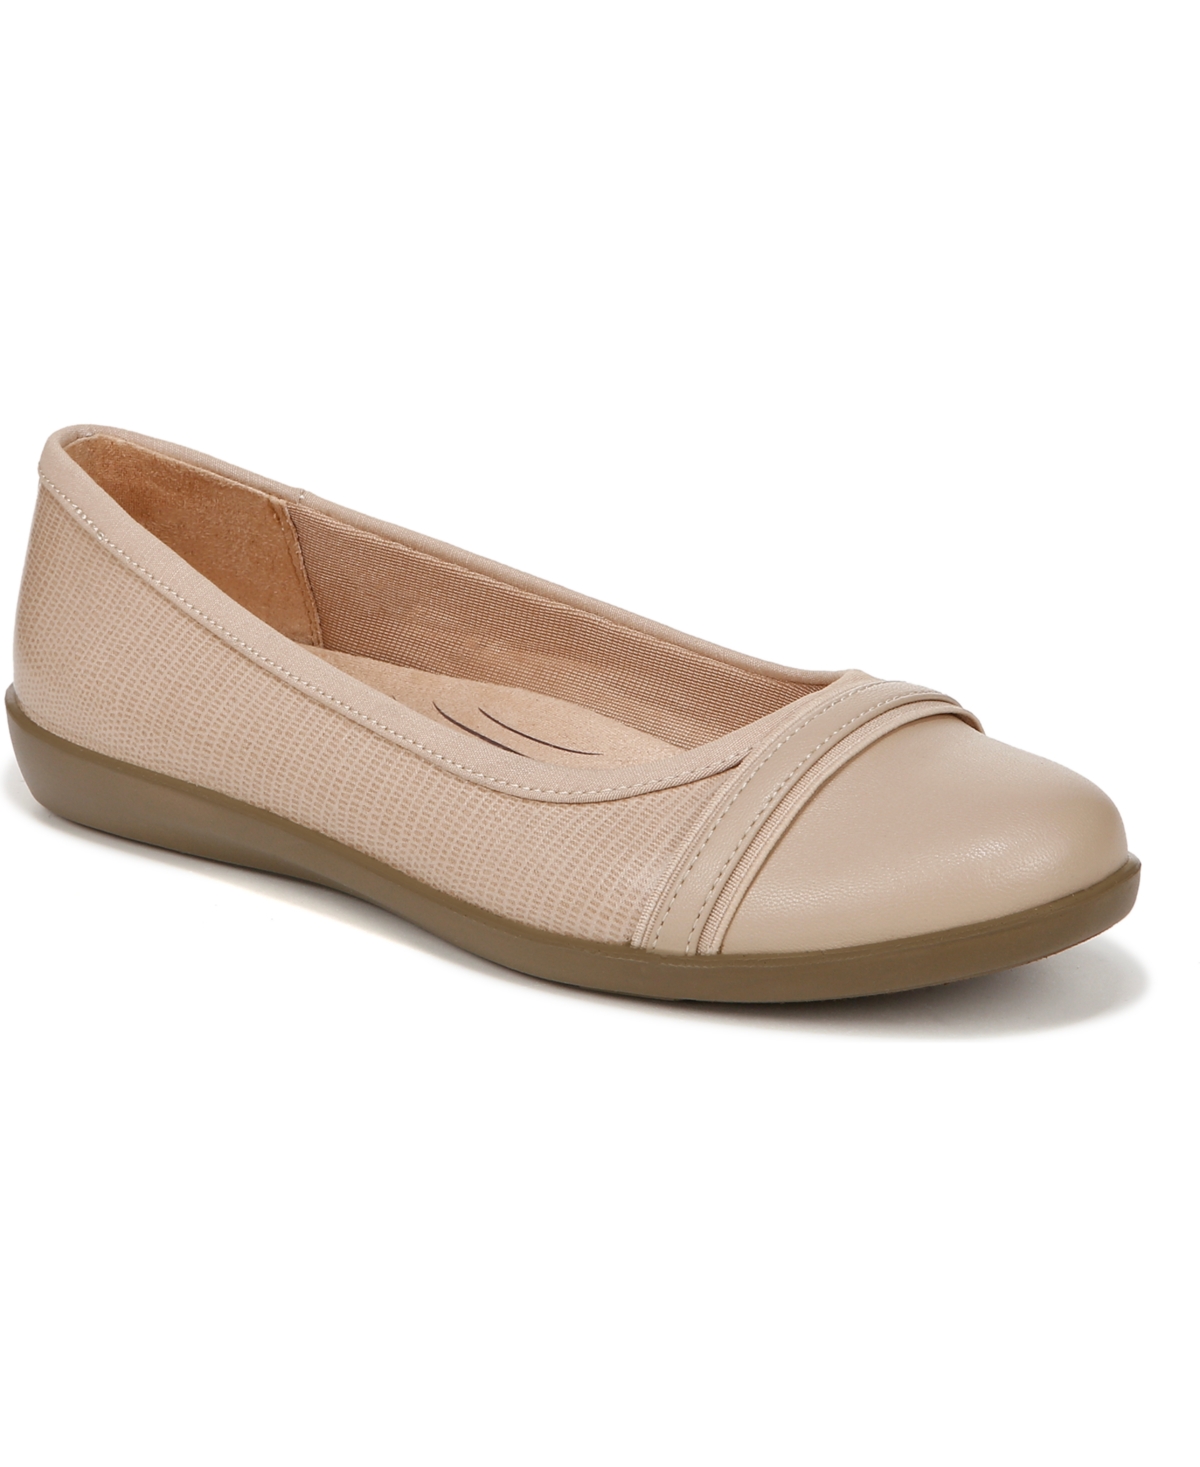 Shop Lifestride Nile Ballet Flats In Tender Taupe Faux Leather